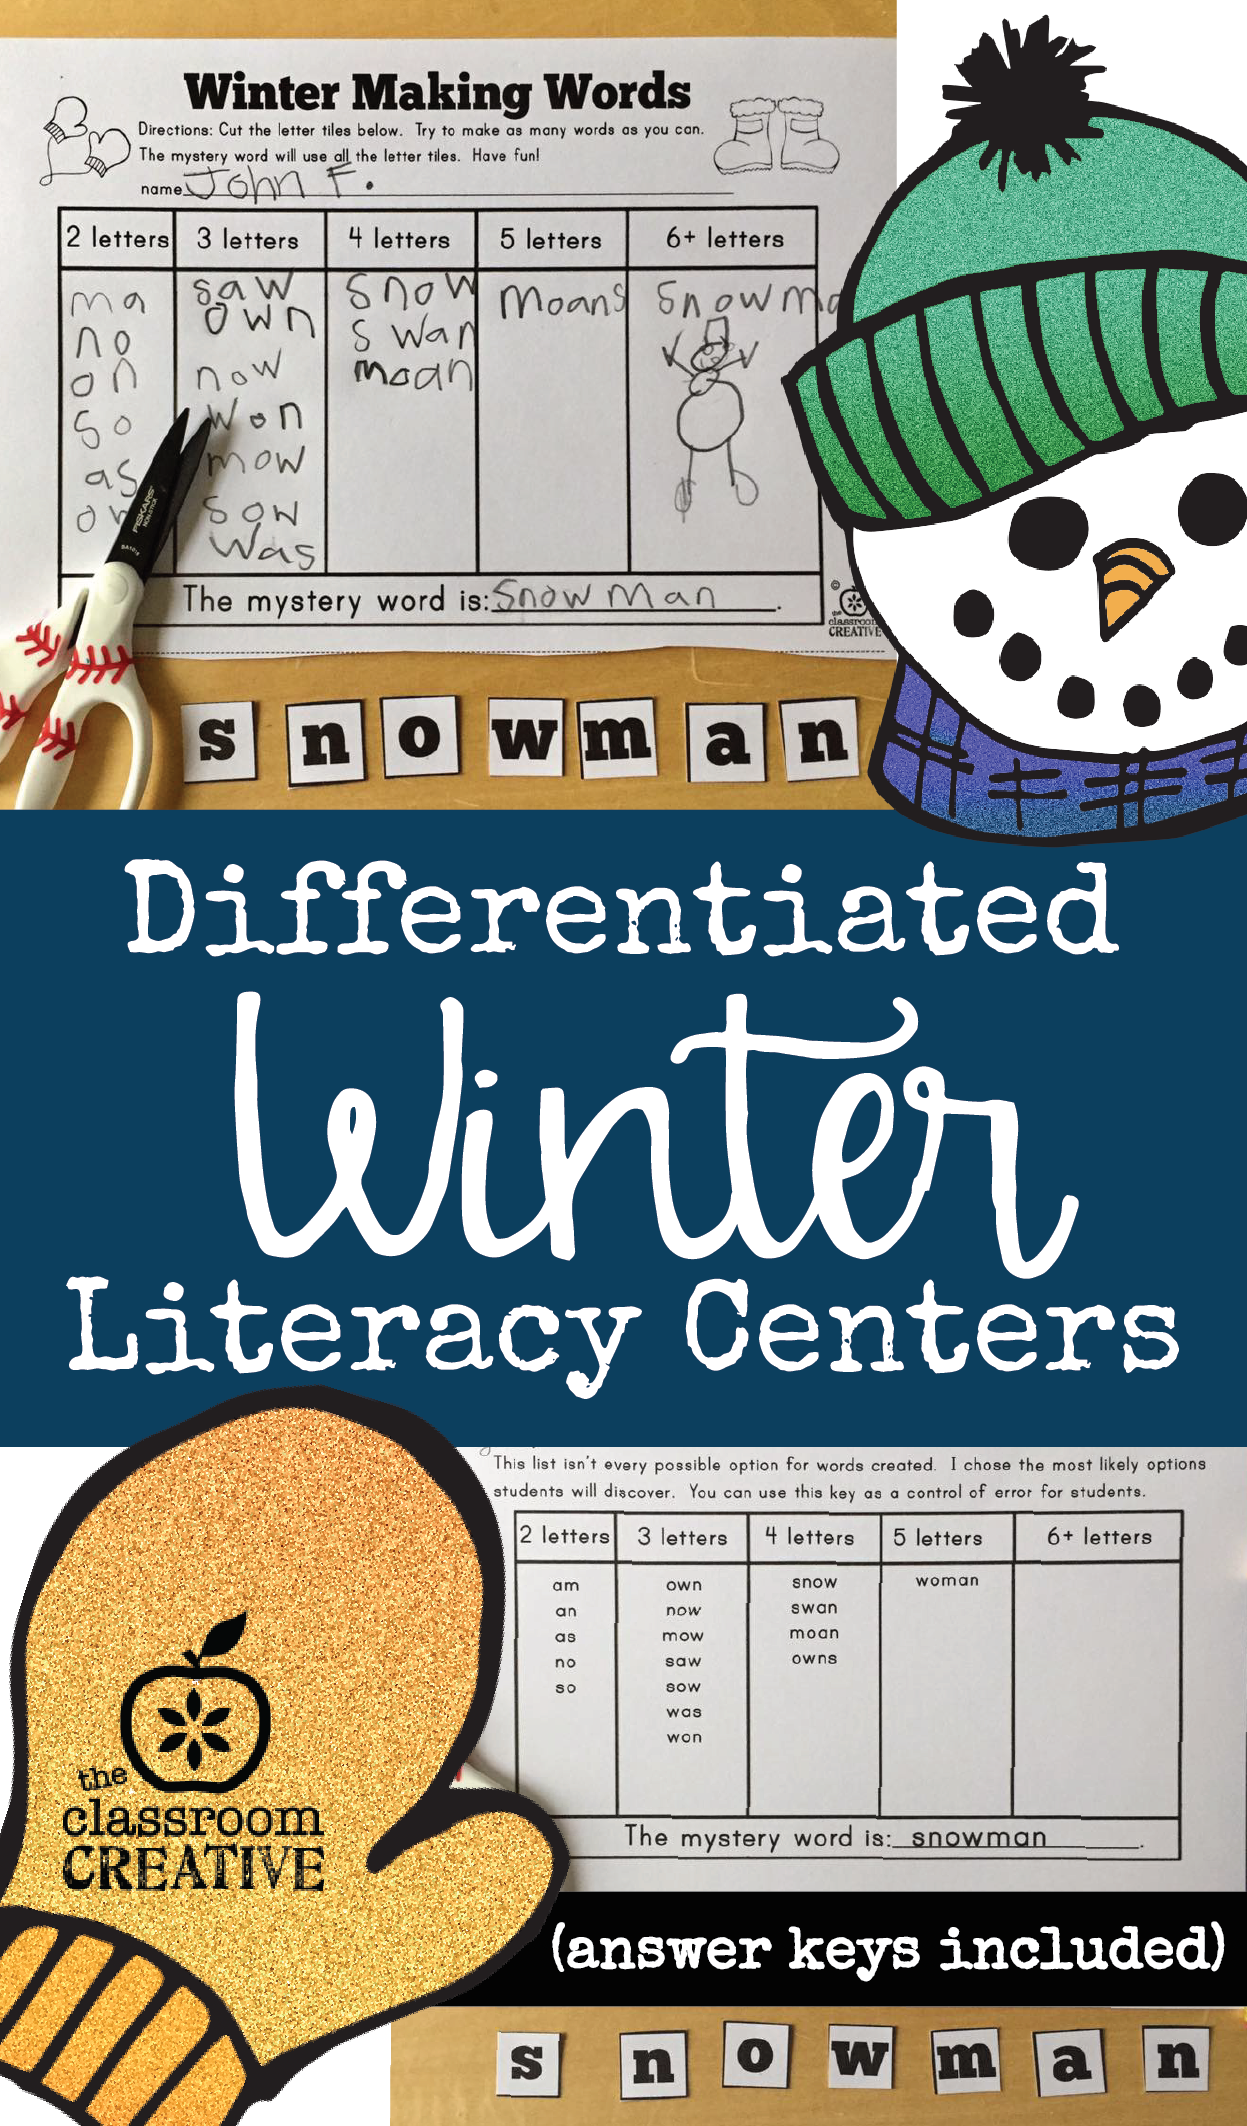 Differentiated Winter Literacy Centers for Kindergarten, First Grade, and Second Grade